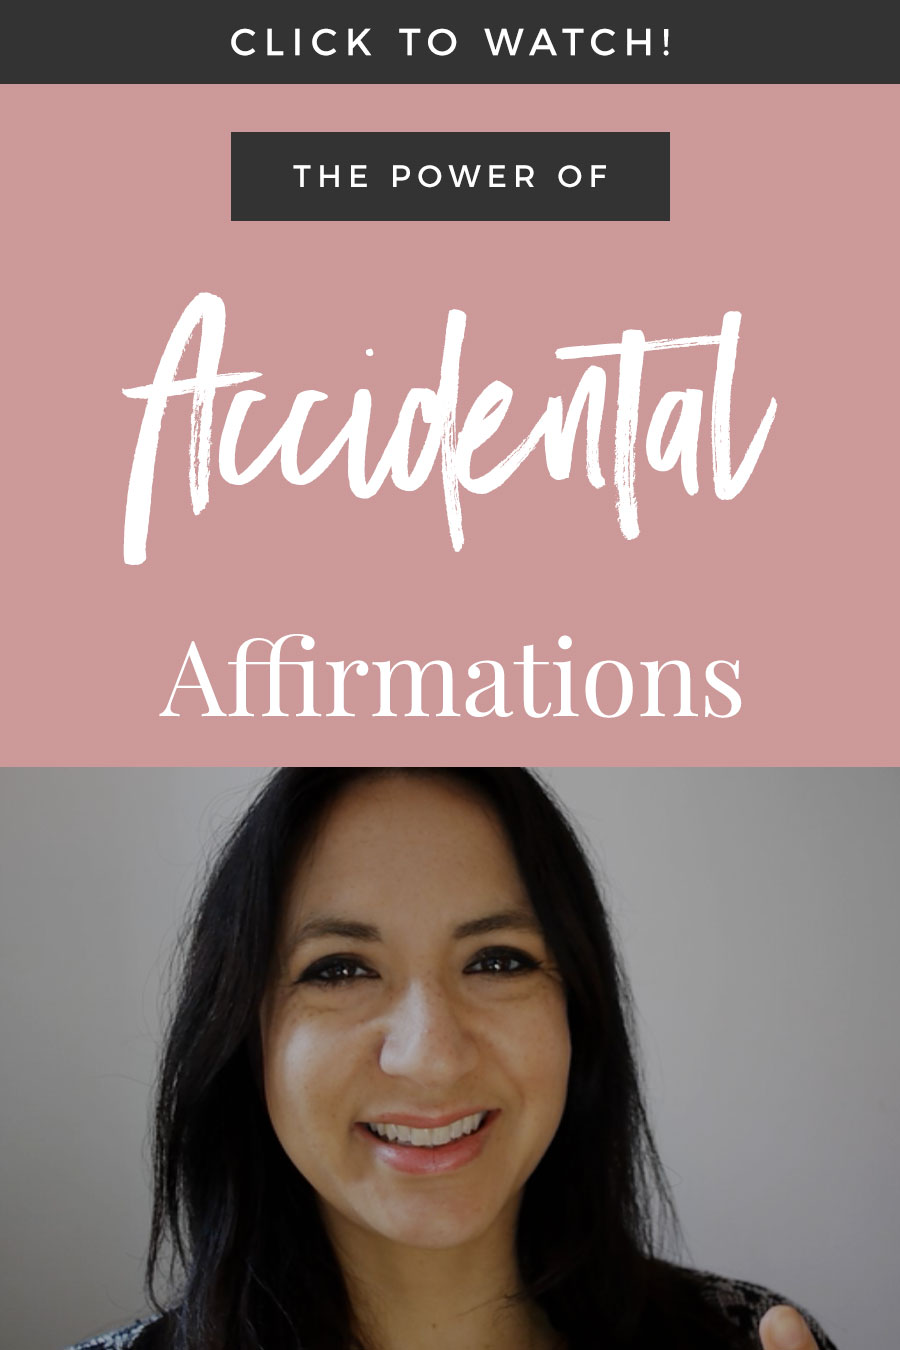 The Power Of Accidental Affirmations